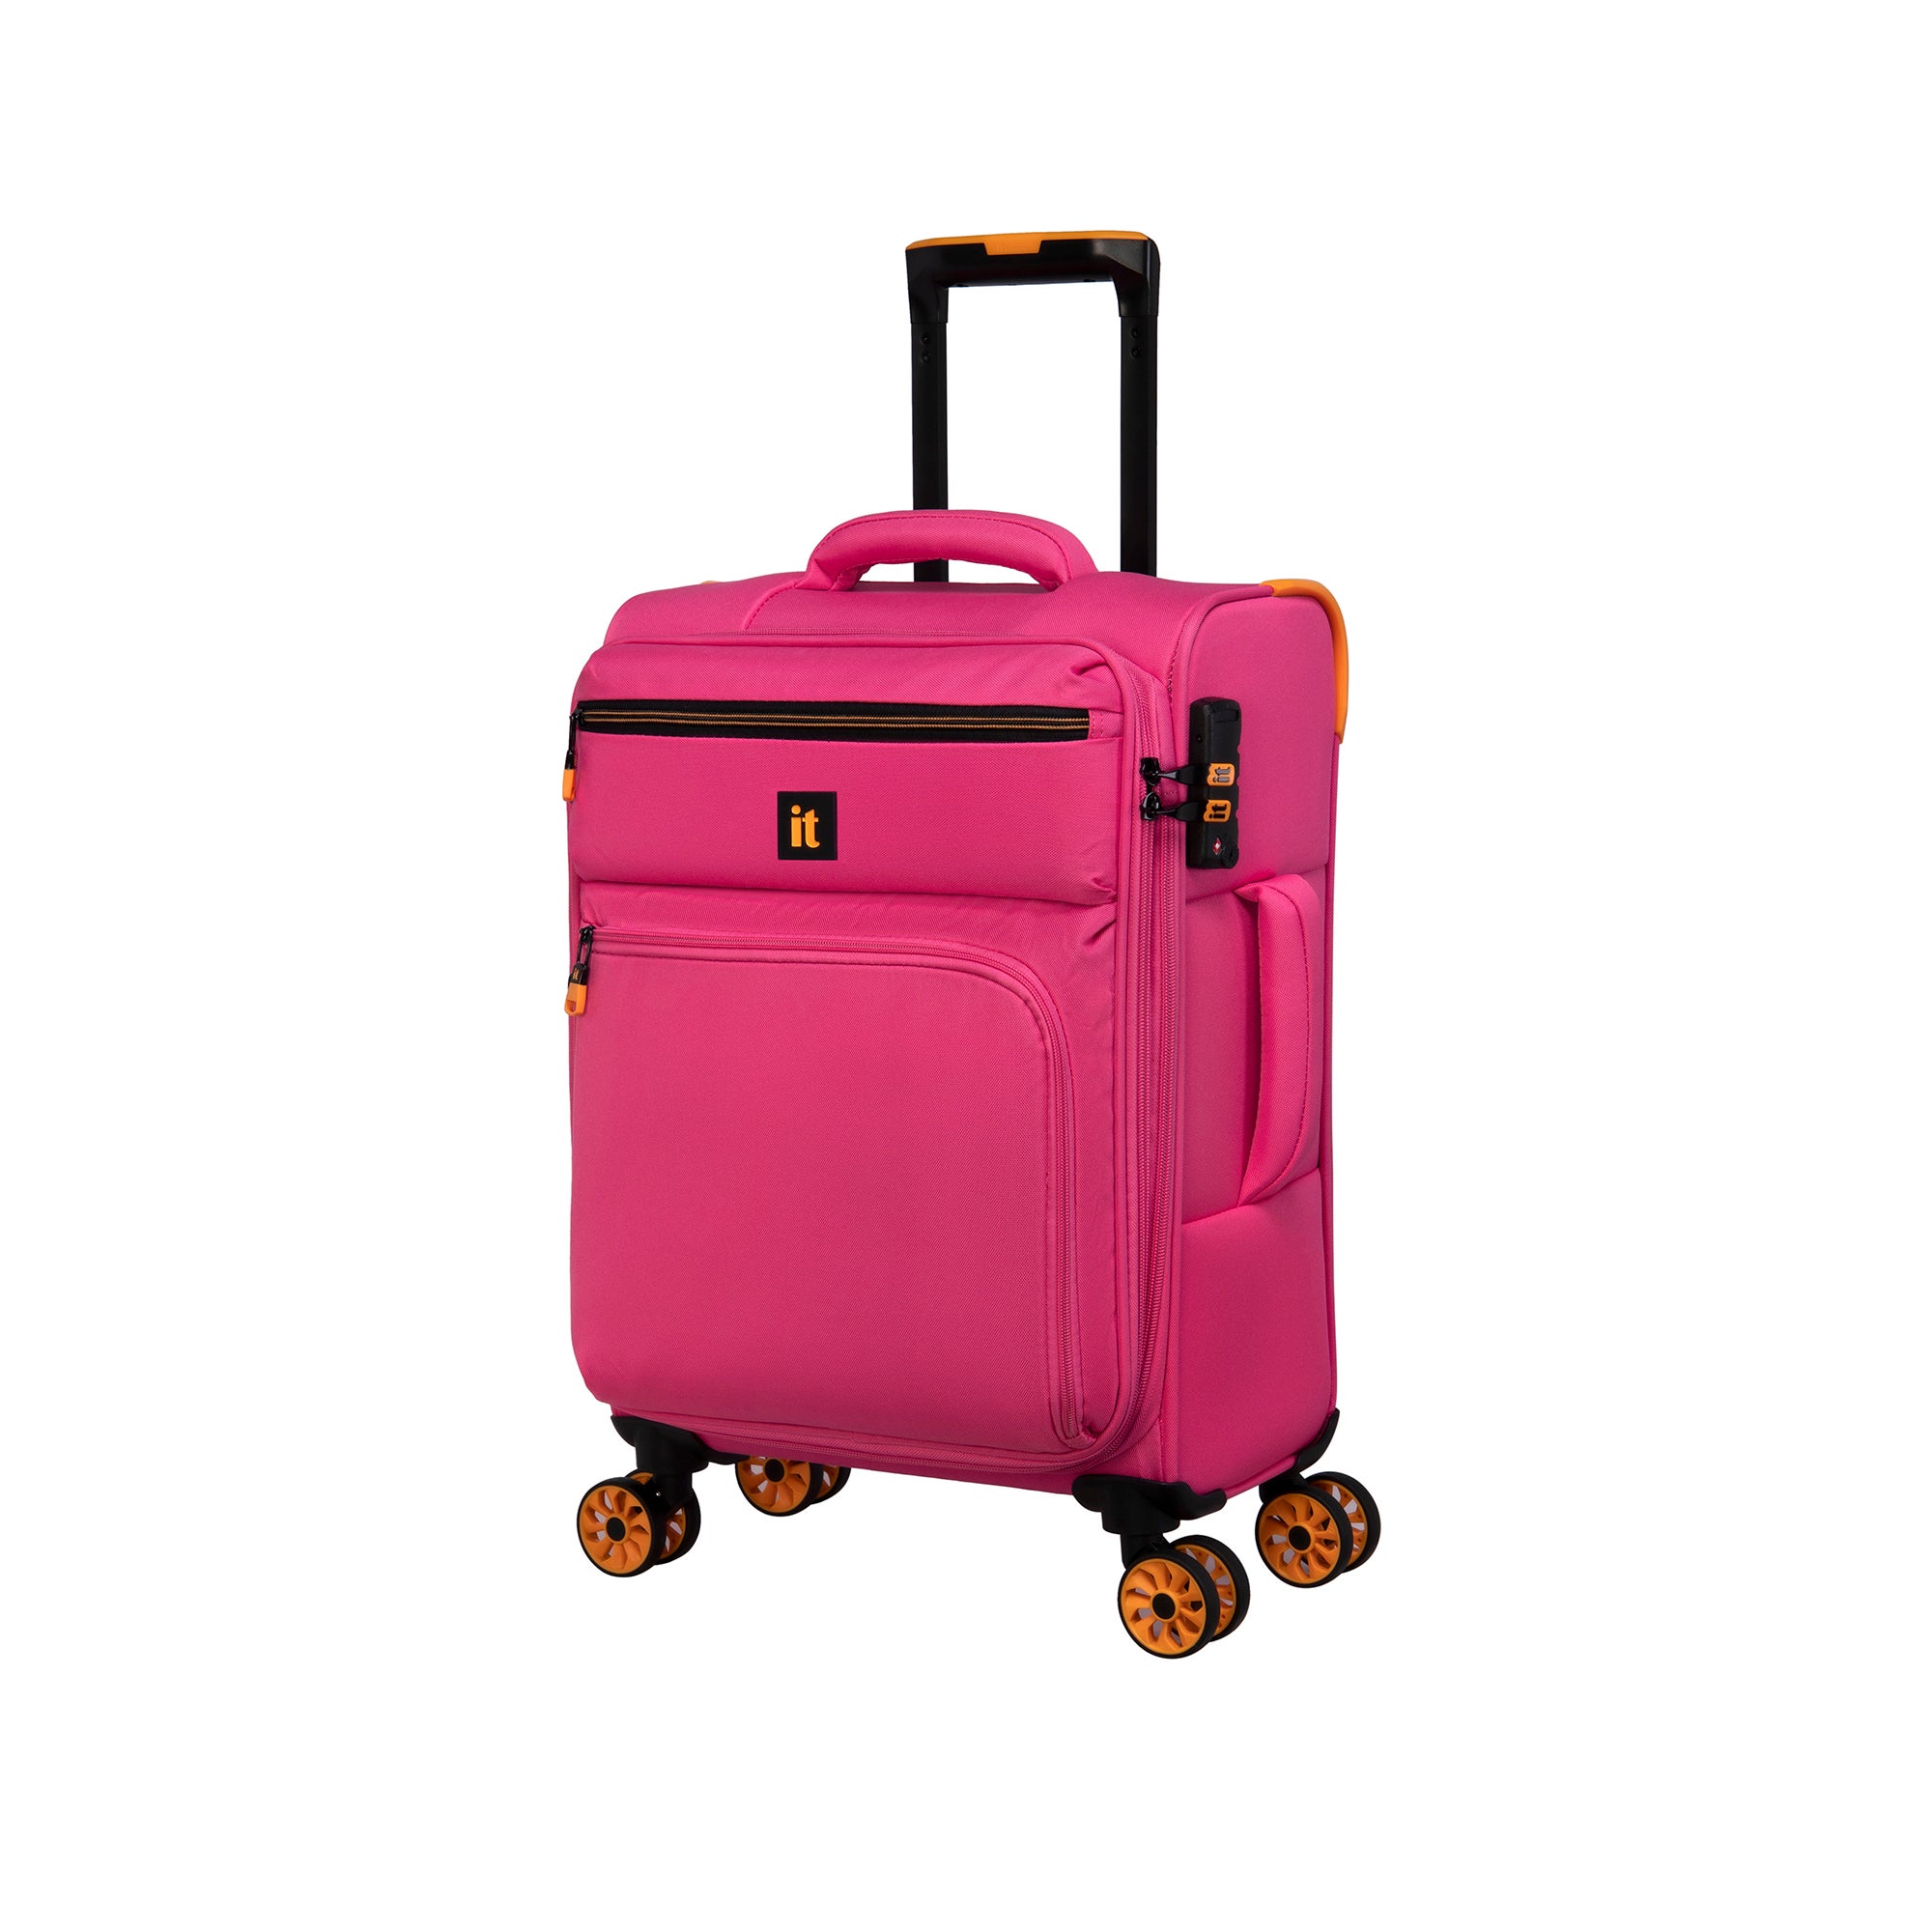 IT Luggage Compartment Soft Shell Suitcase